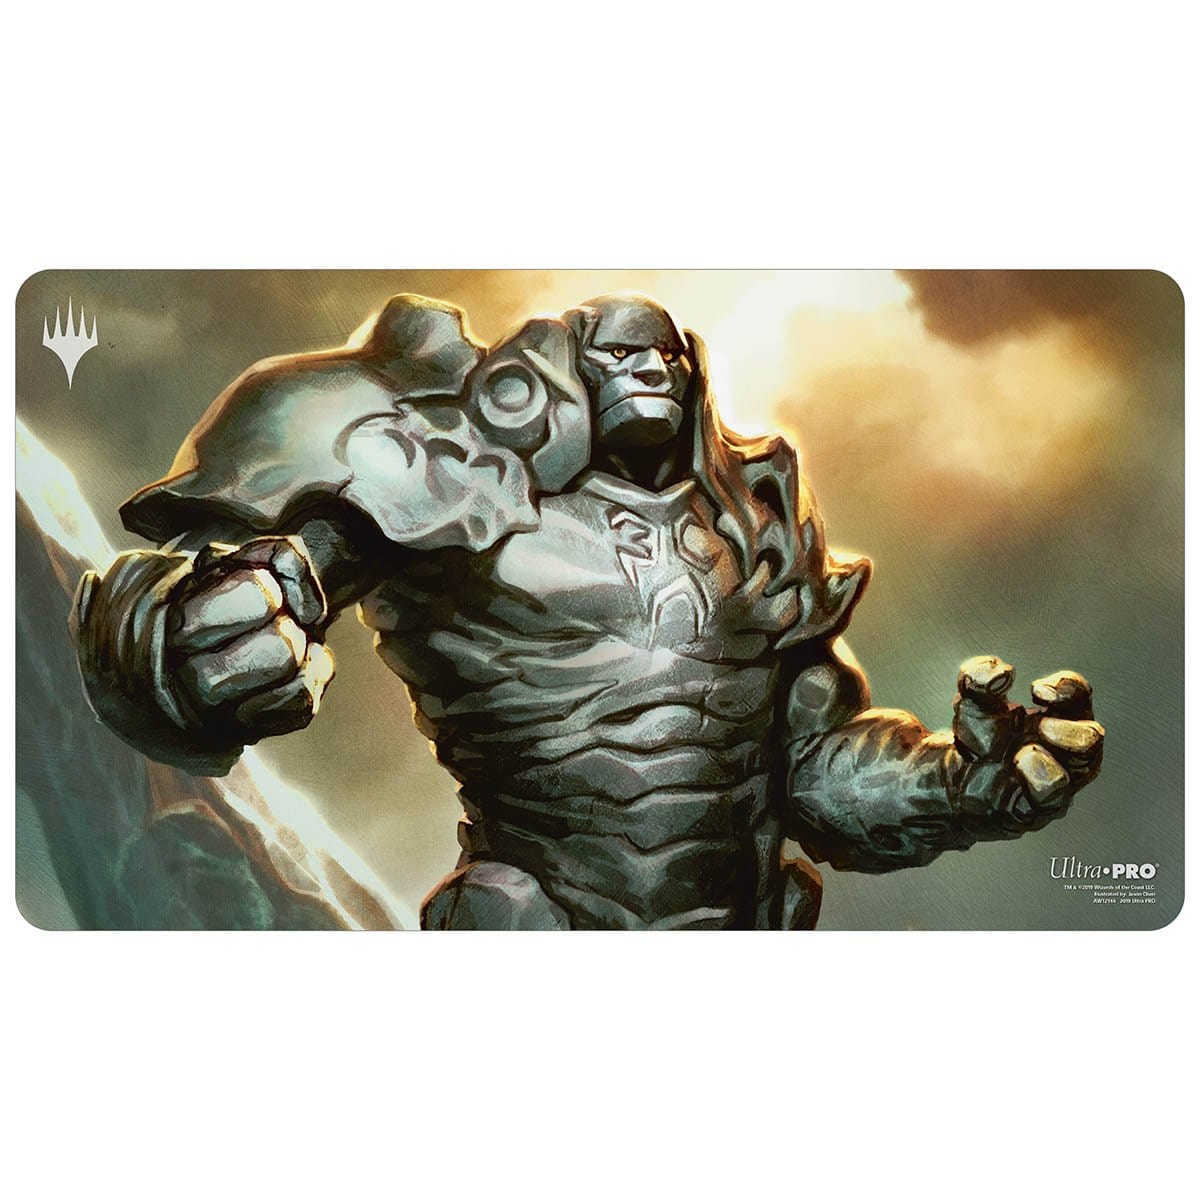 Karn Liberated Playmat - Playmat - Original Magic Art - Accessories for Magic the Gathering and other card games